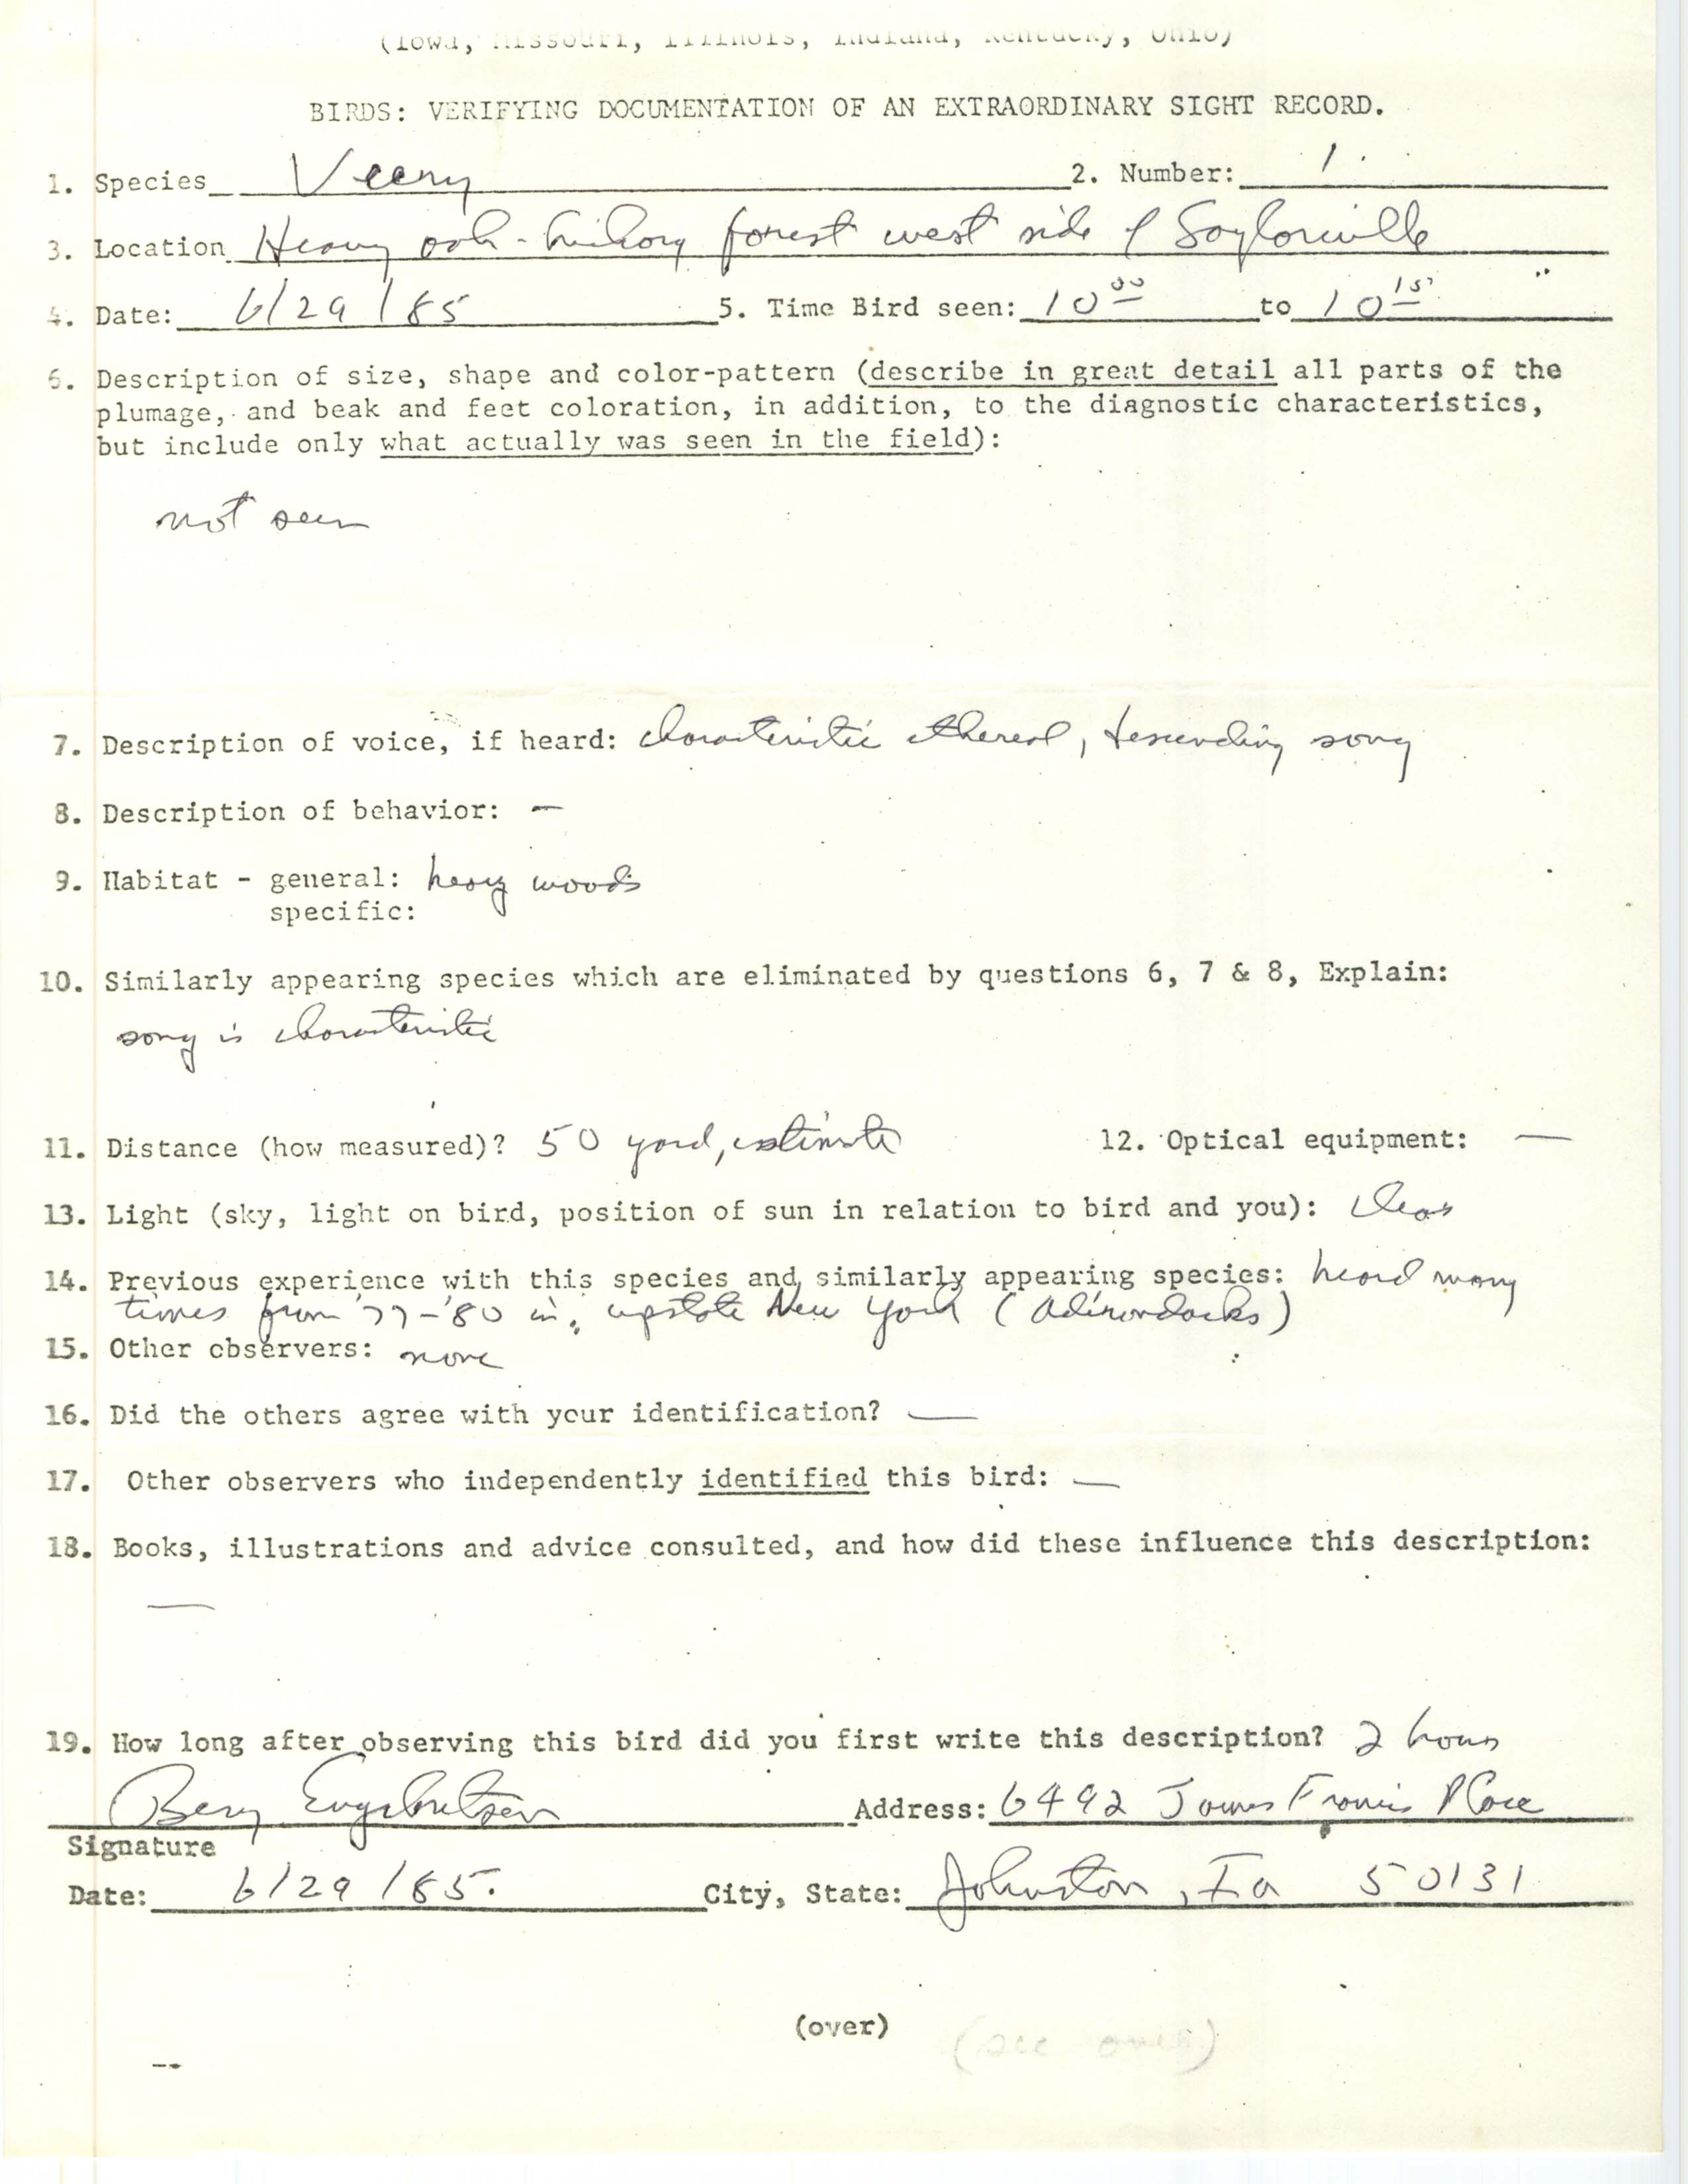 Rare bird documentation form for Veery at Saylorville Lake in 1985